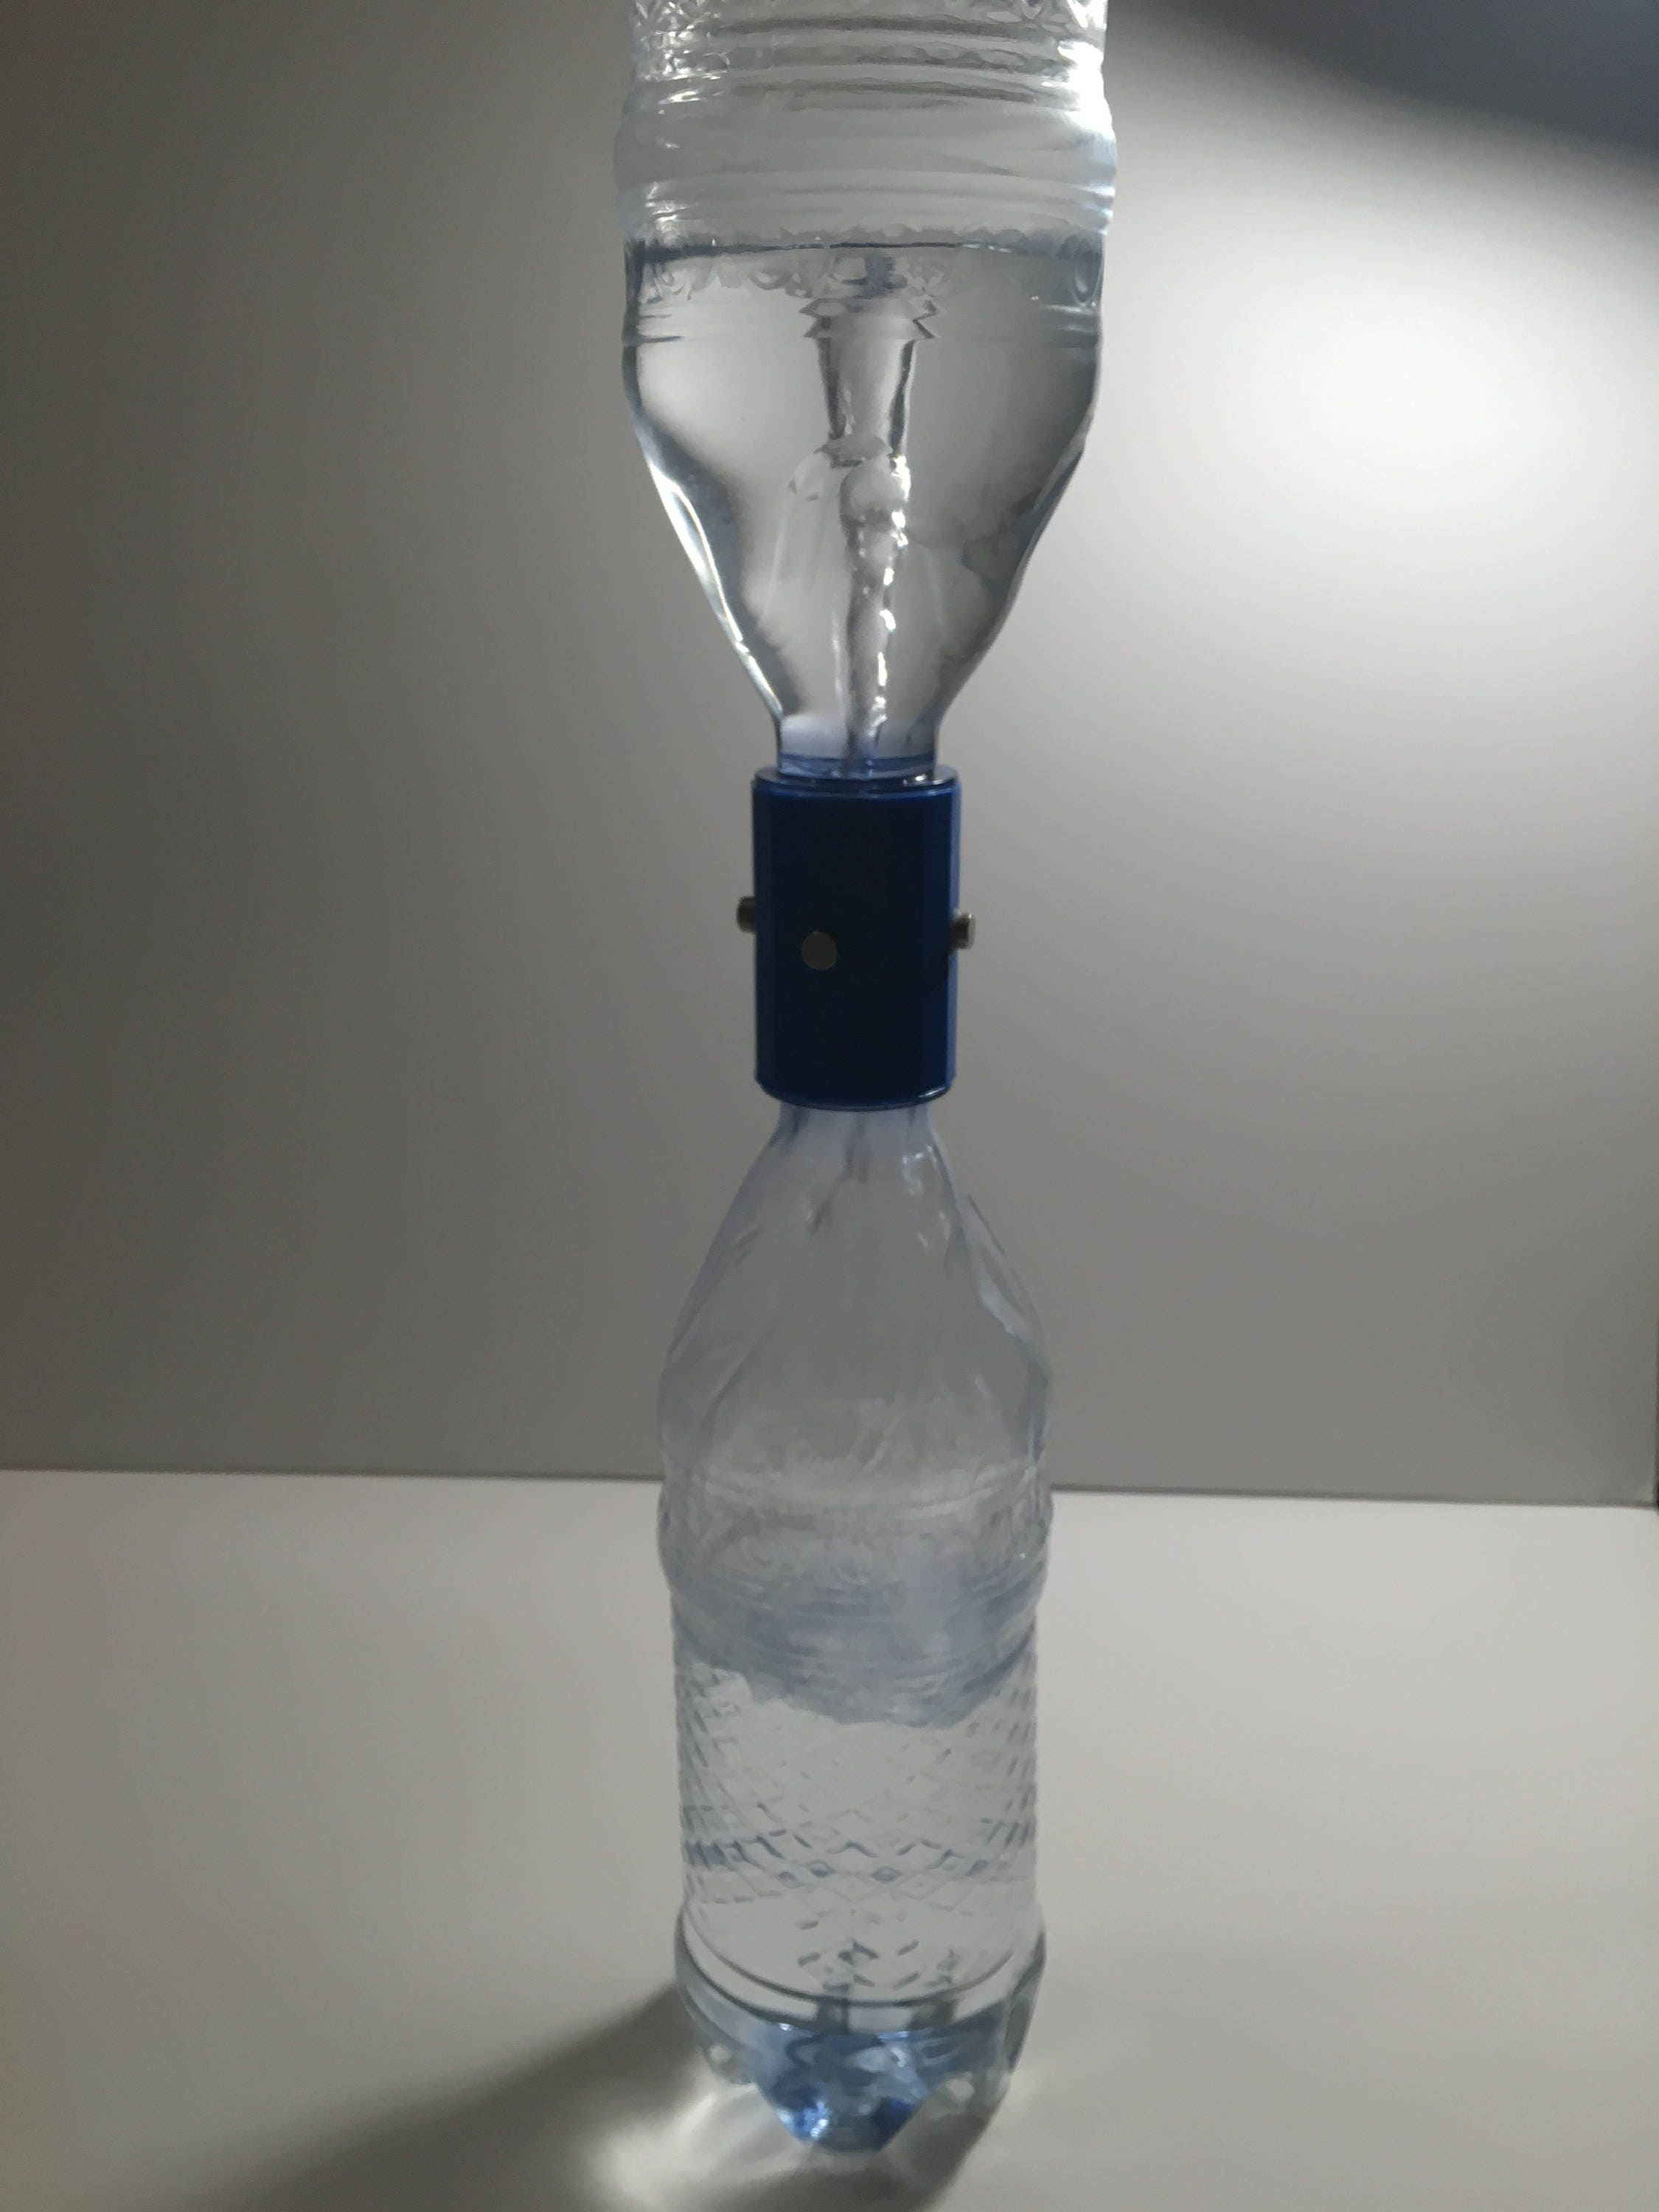 Double Vortex, Magnetic Implosion, Water Structuring Device bottles Not  Included 